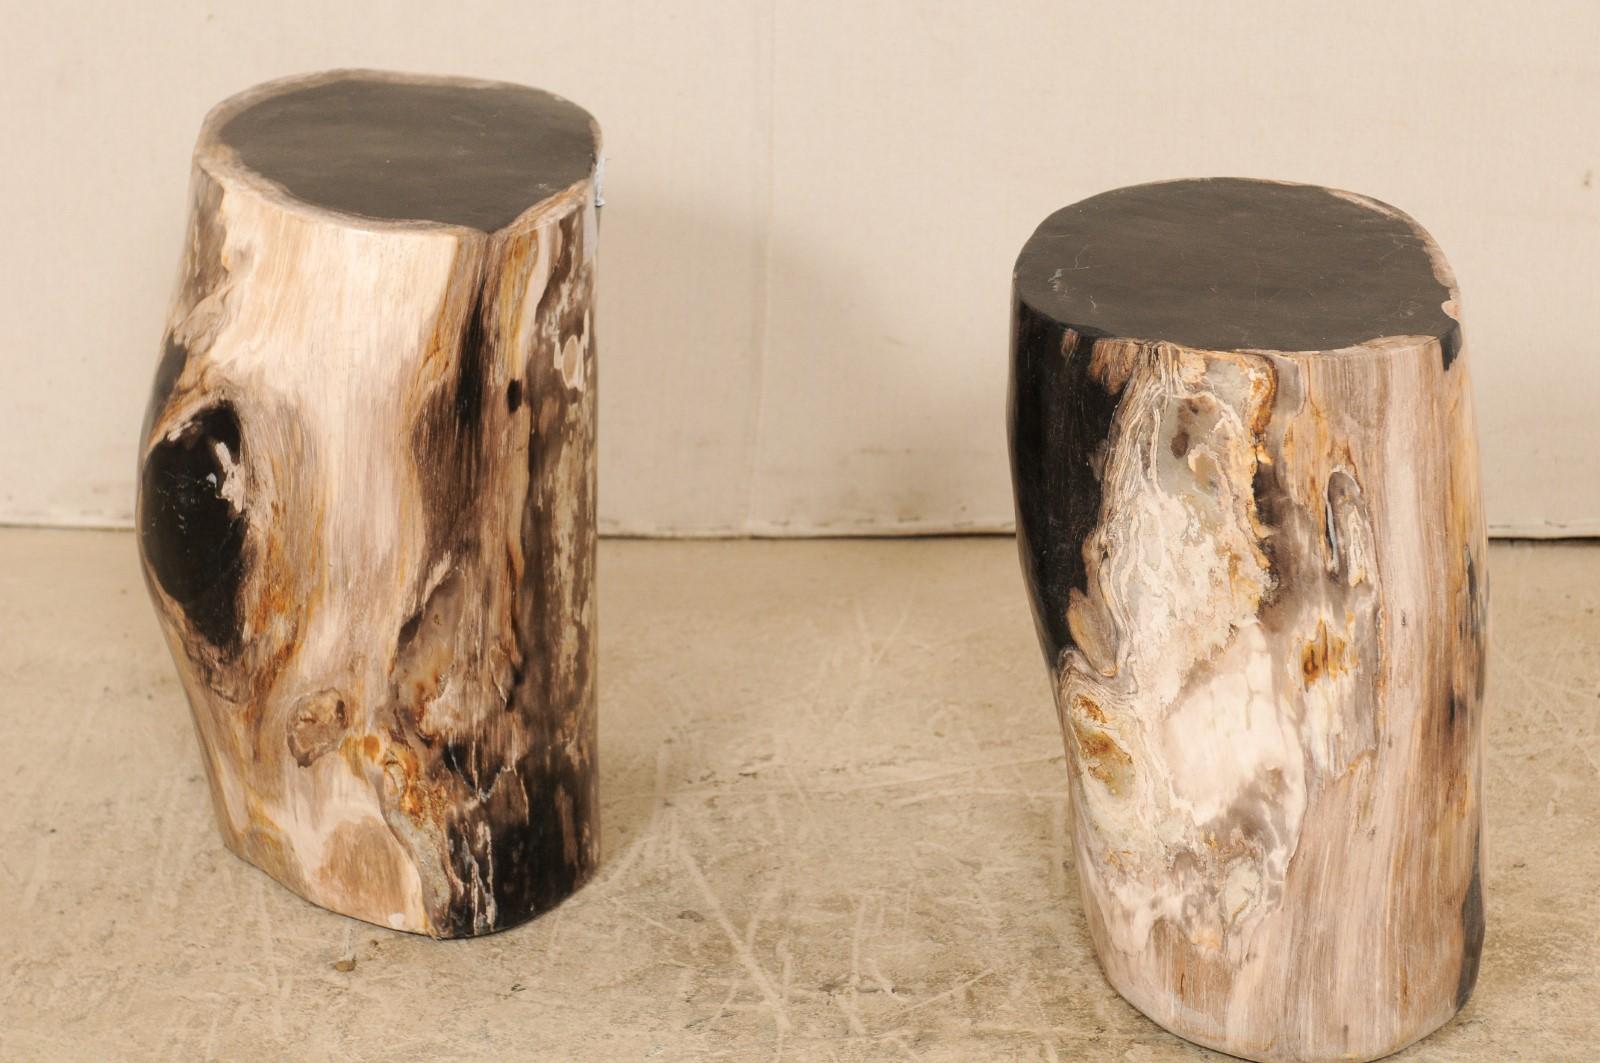 Pair of Polished Petrified Wood Side Tables or Stools in Cream and Black 2